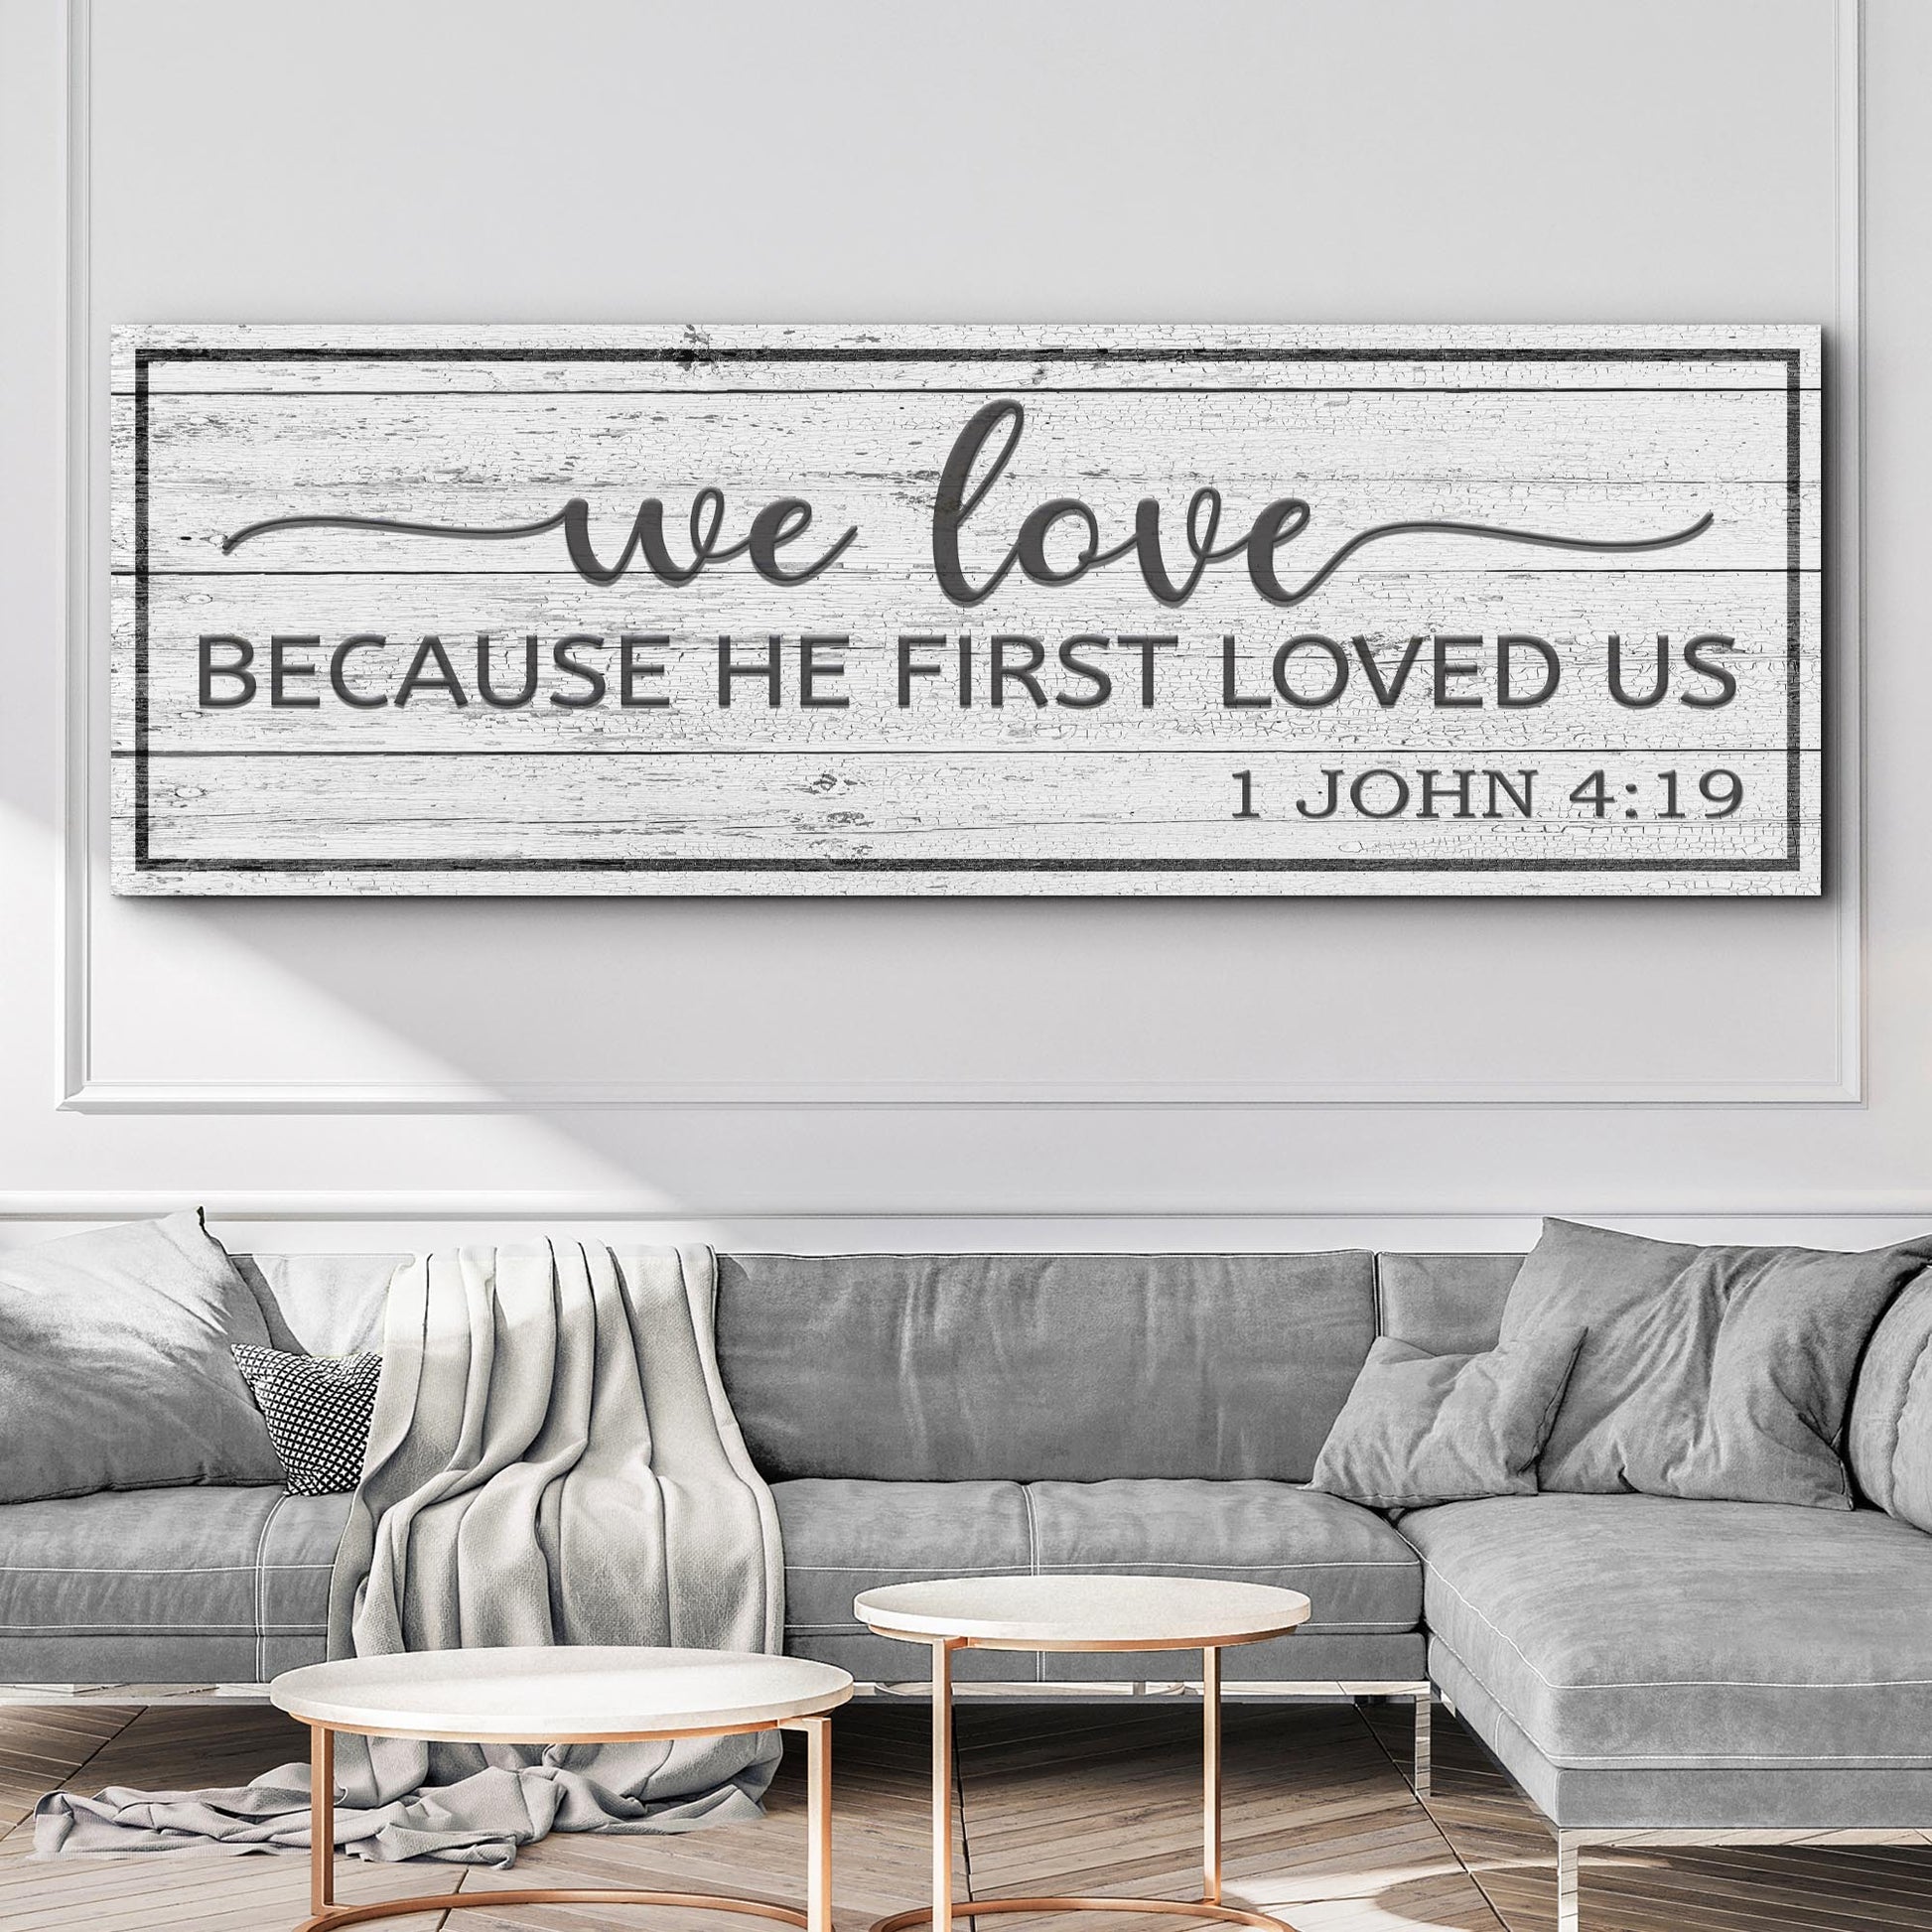 1 John 4:19 Because He First Loved Us Sign - Image by Tailored Canvases